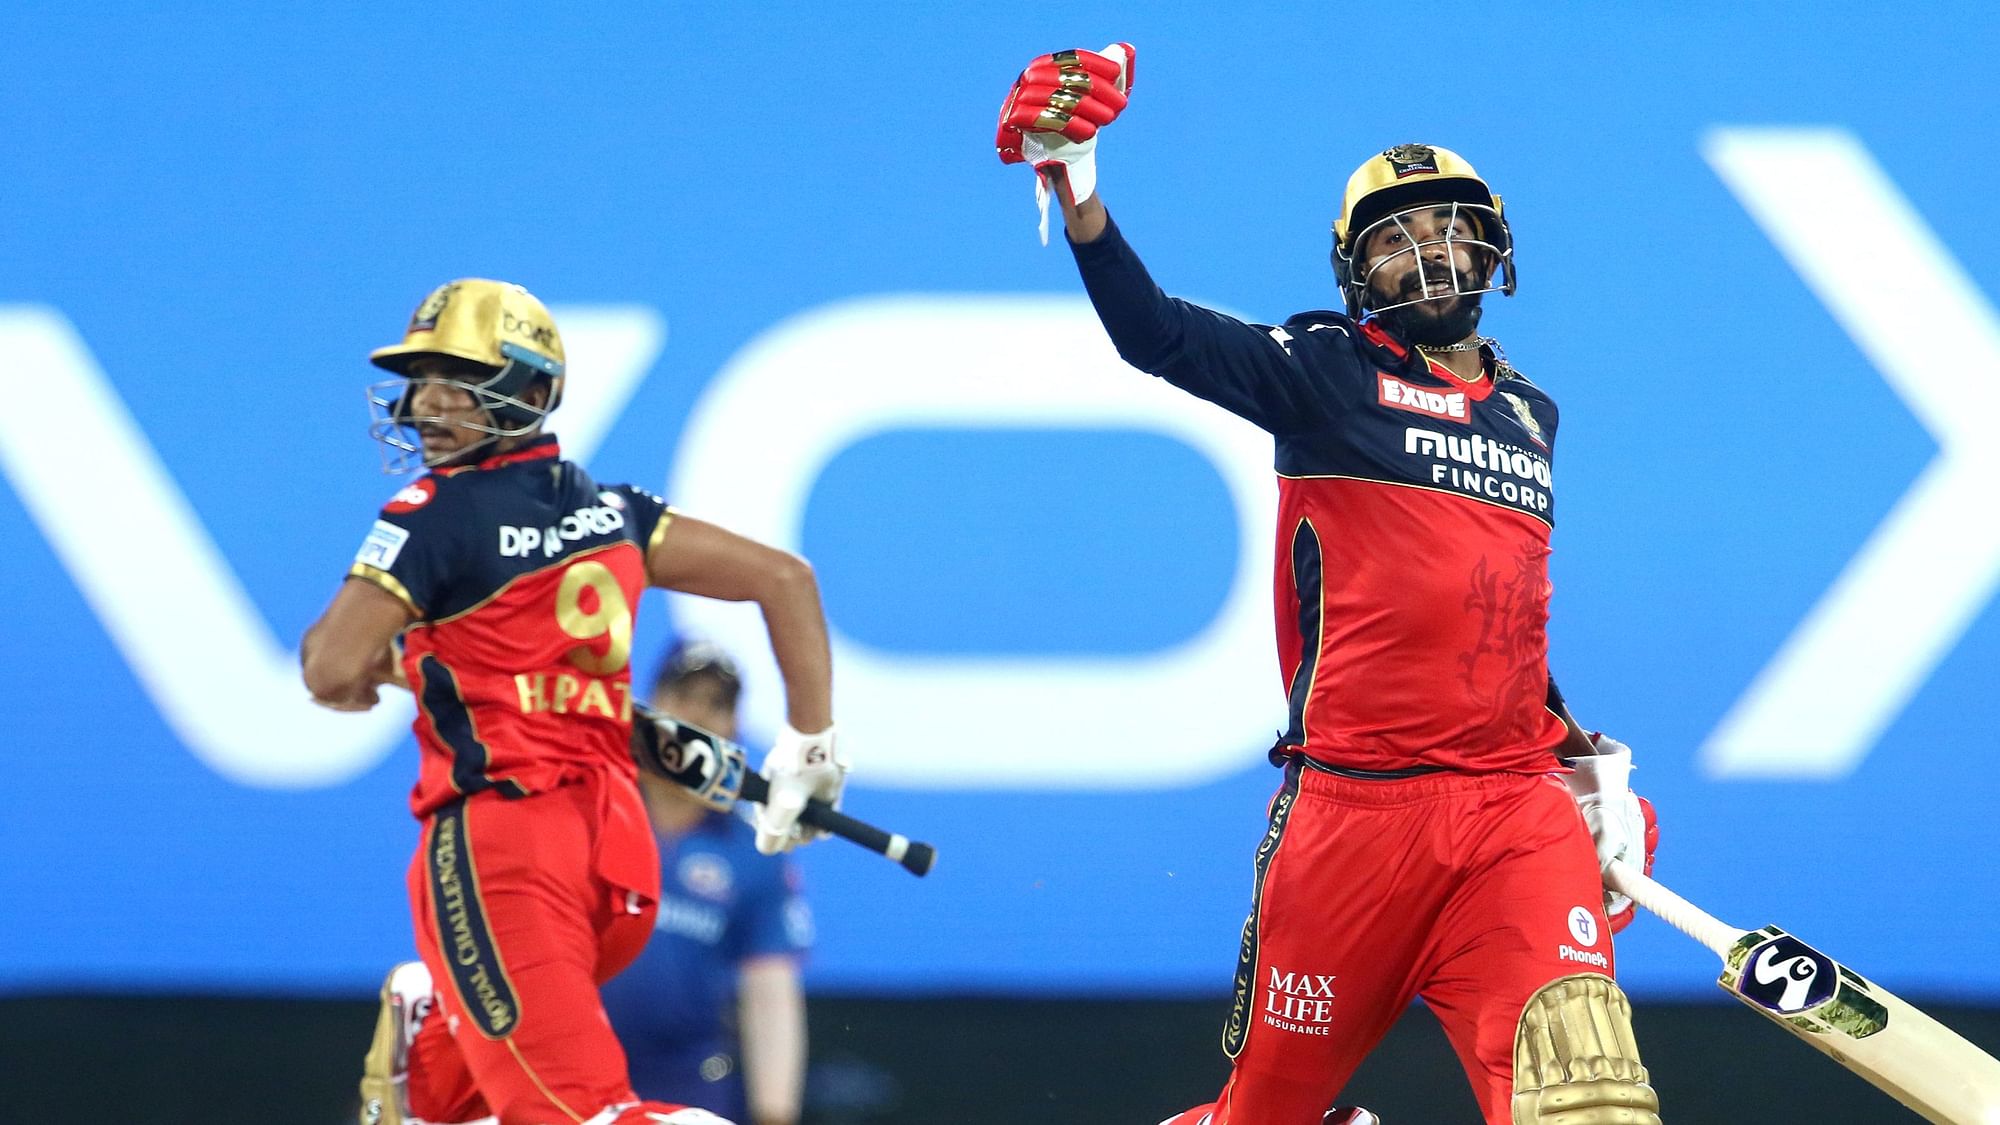 AB de Villiers’ 48 and a fifer from Harshal Patel helped RCB beat Mumbai Indians by 2 wickets on Friday night in Chennai.